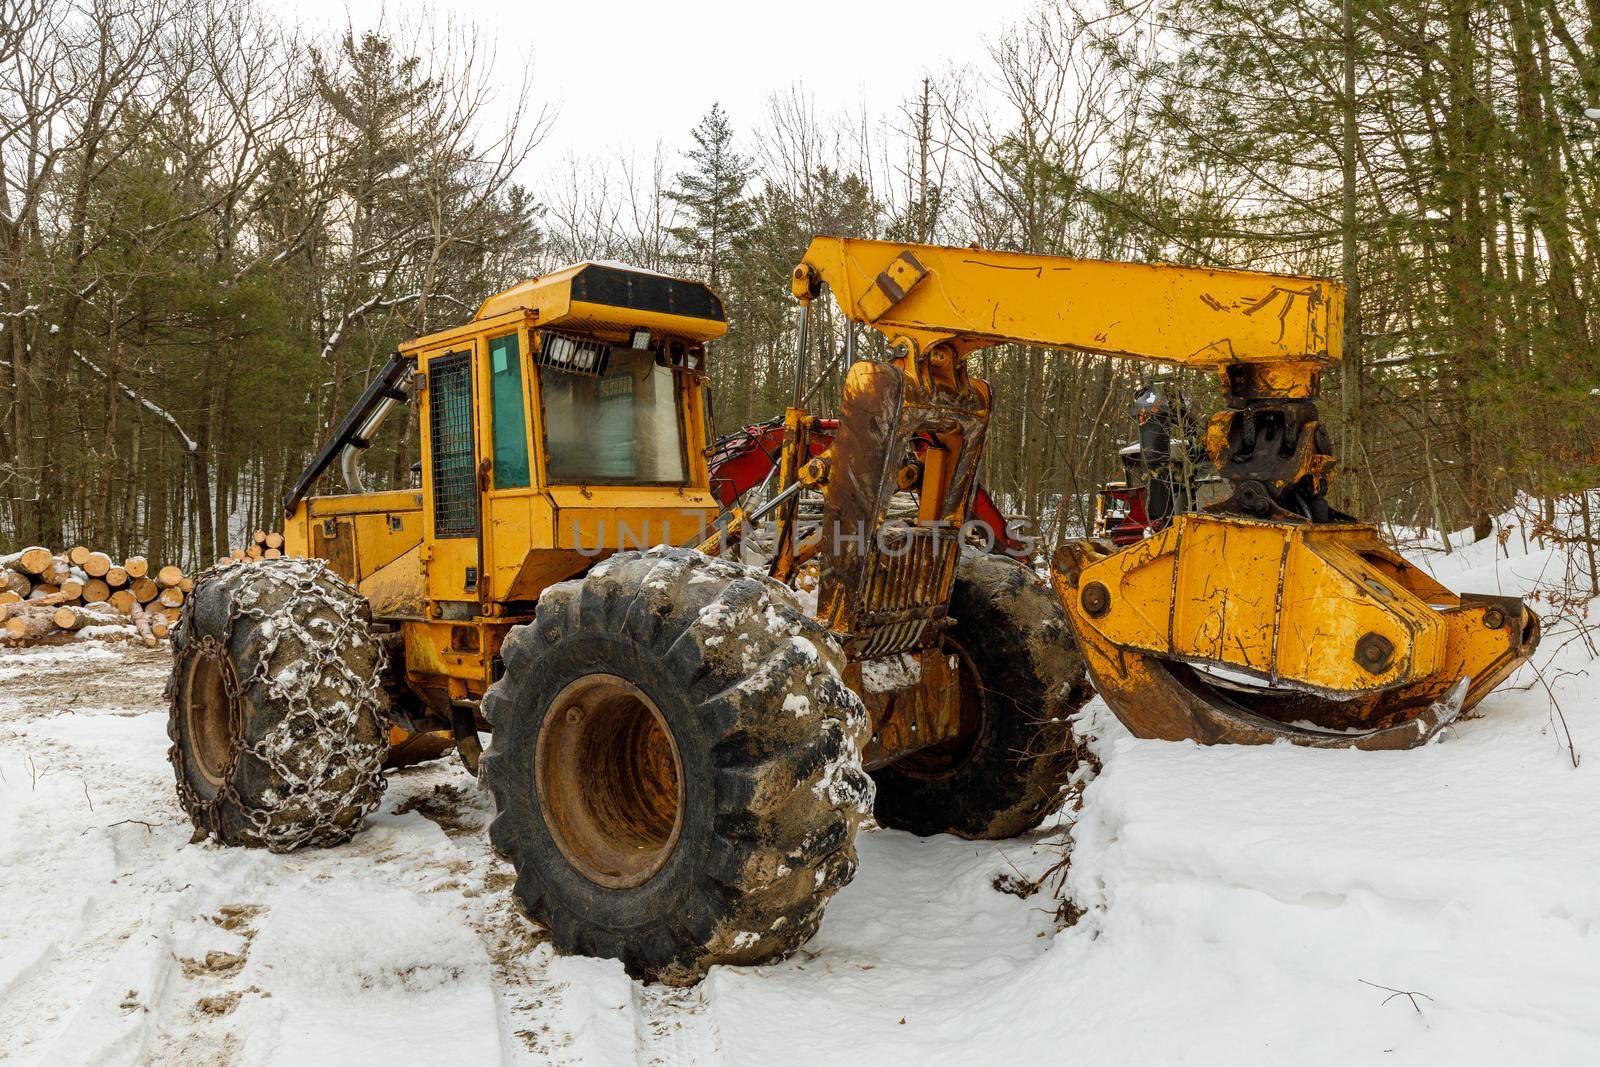 A Yellow Log Skidder Parked in the Snow. A pile of logs is in the background if this logging site. High quality photo